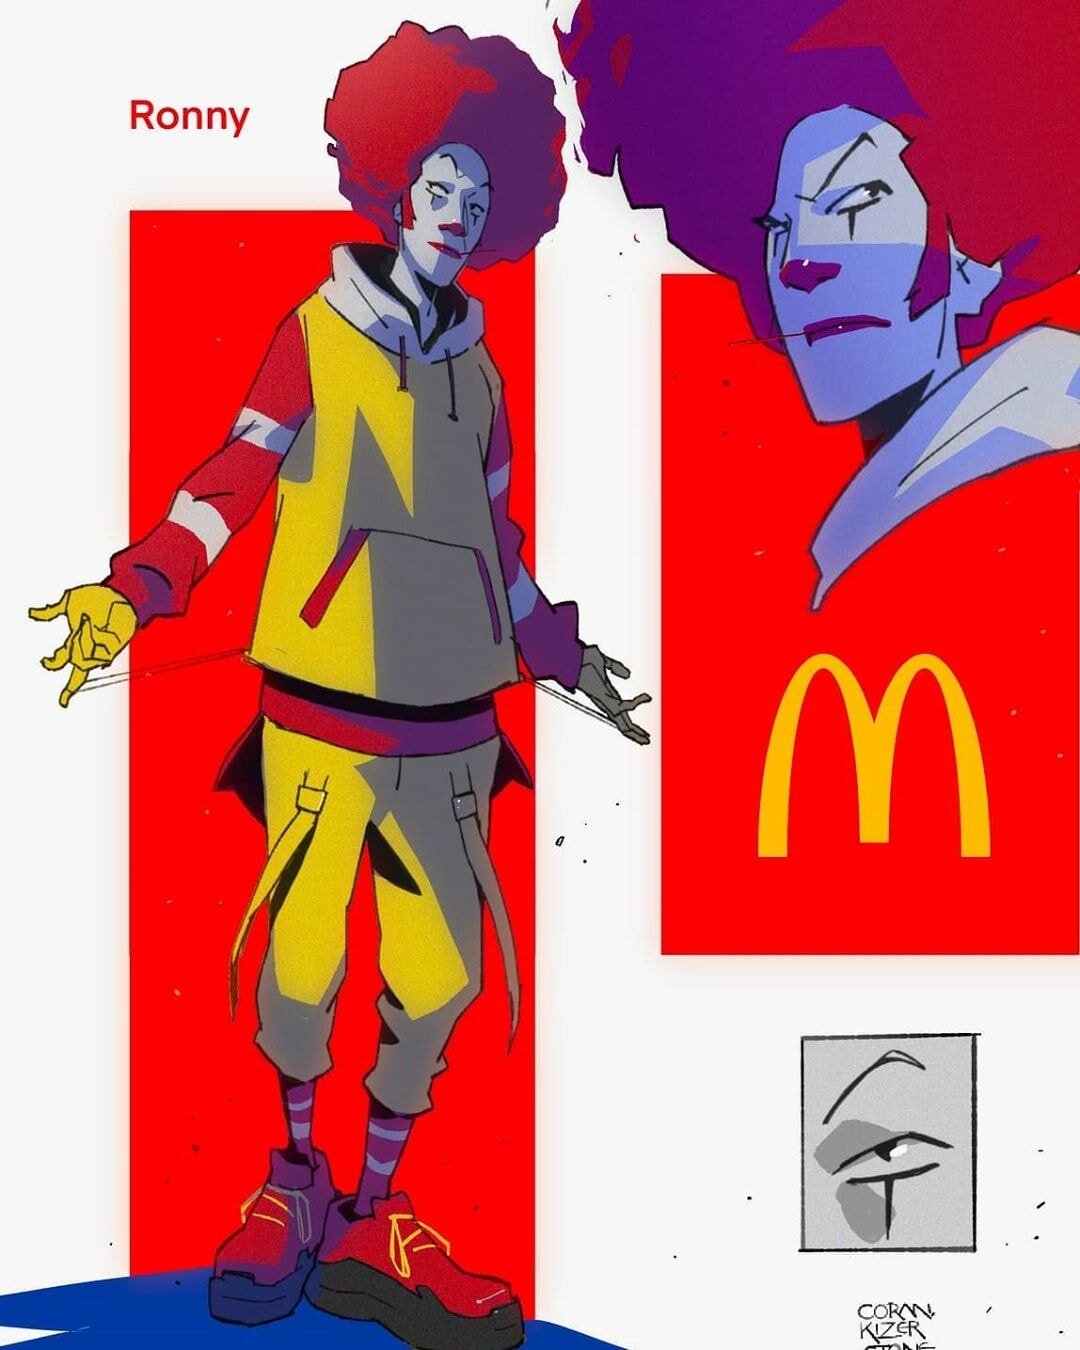 Fast Food Mascots Redesigned as Badass Animated-Style Characters —  GeekTyrant